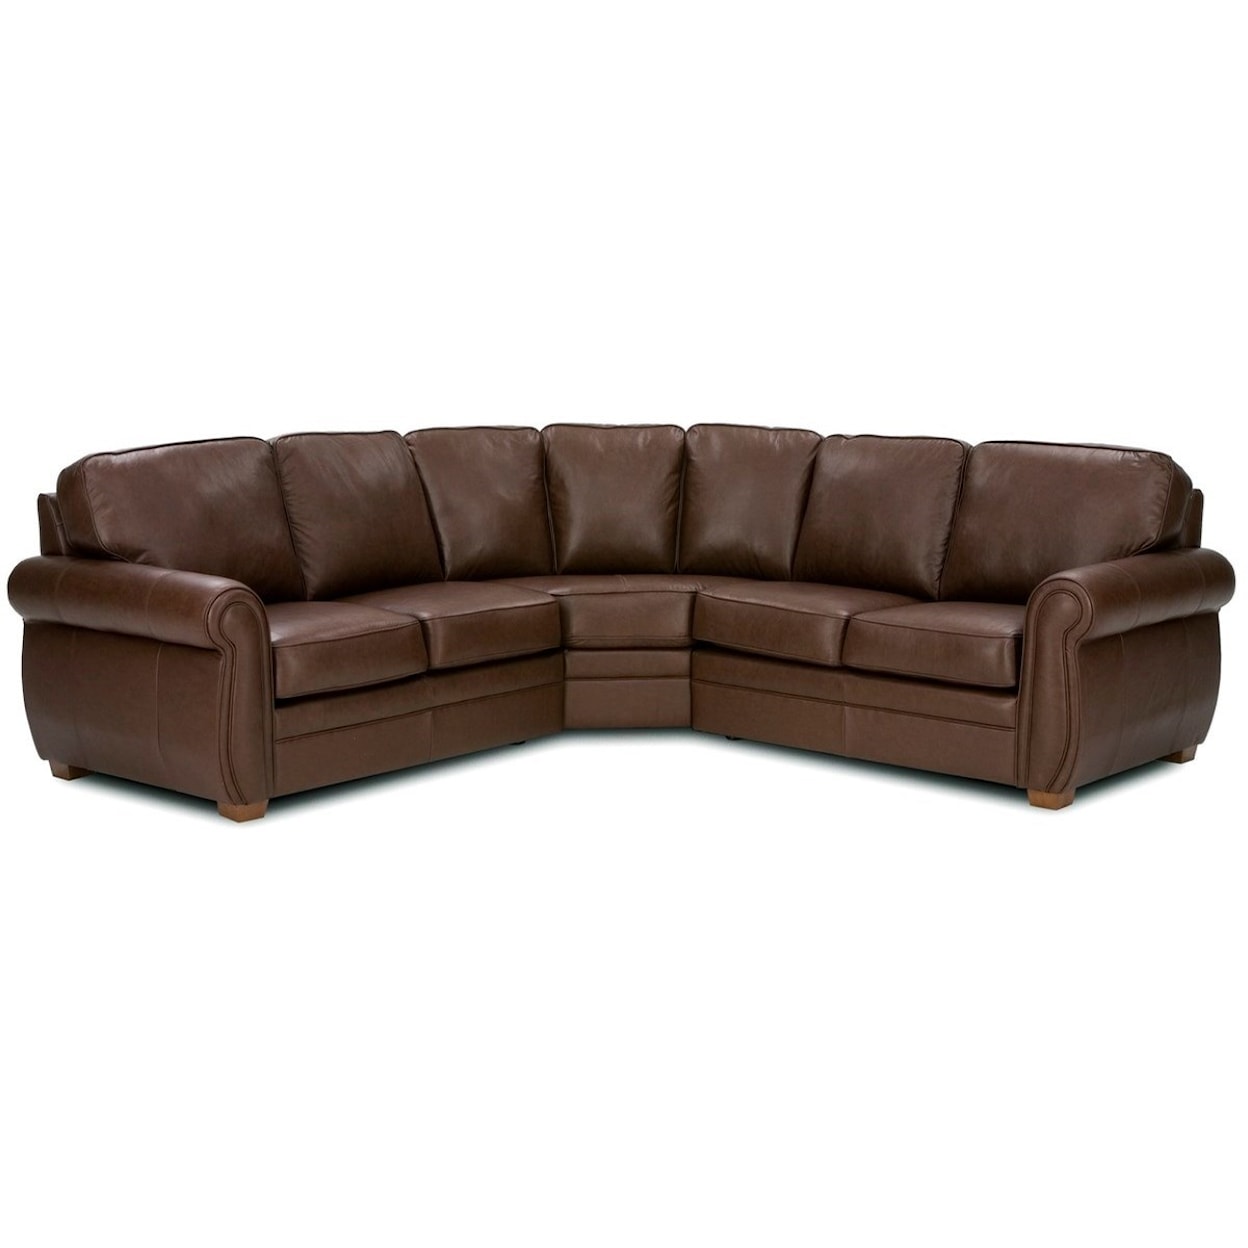 Palliser Viceroy70492 3-Piece Curved Sectional